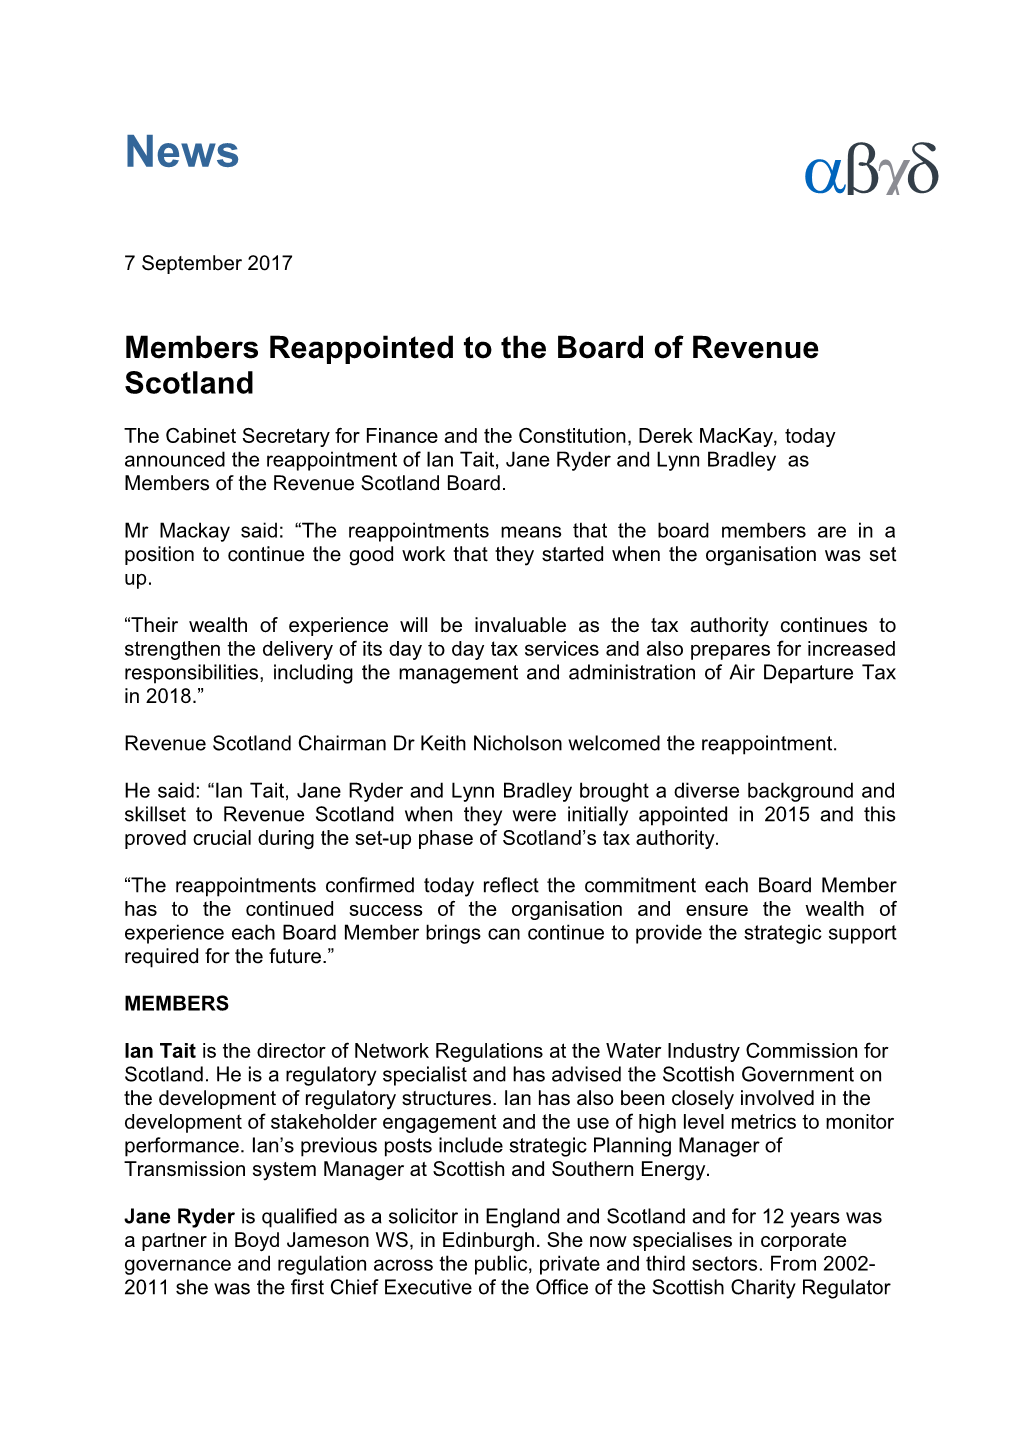 Members Reappointed to the Board of Revenue Scotland